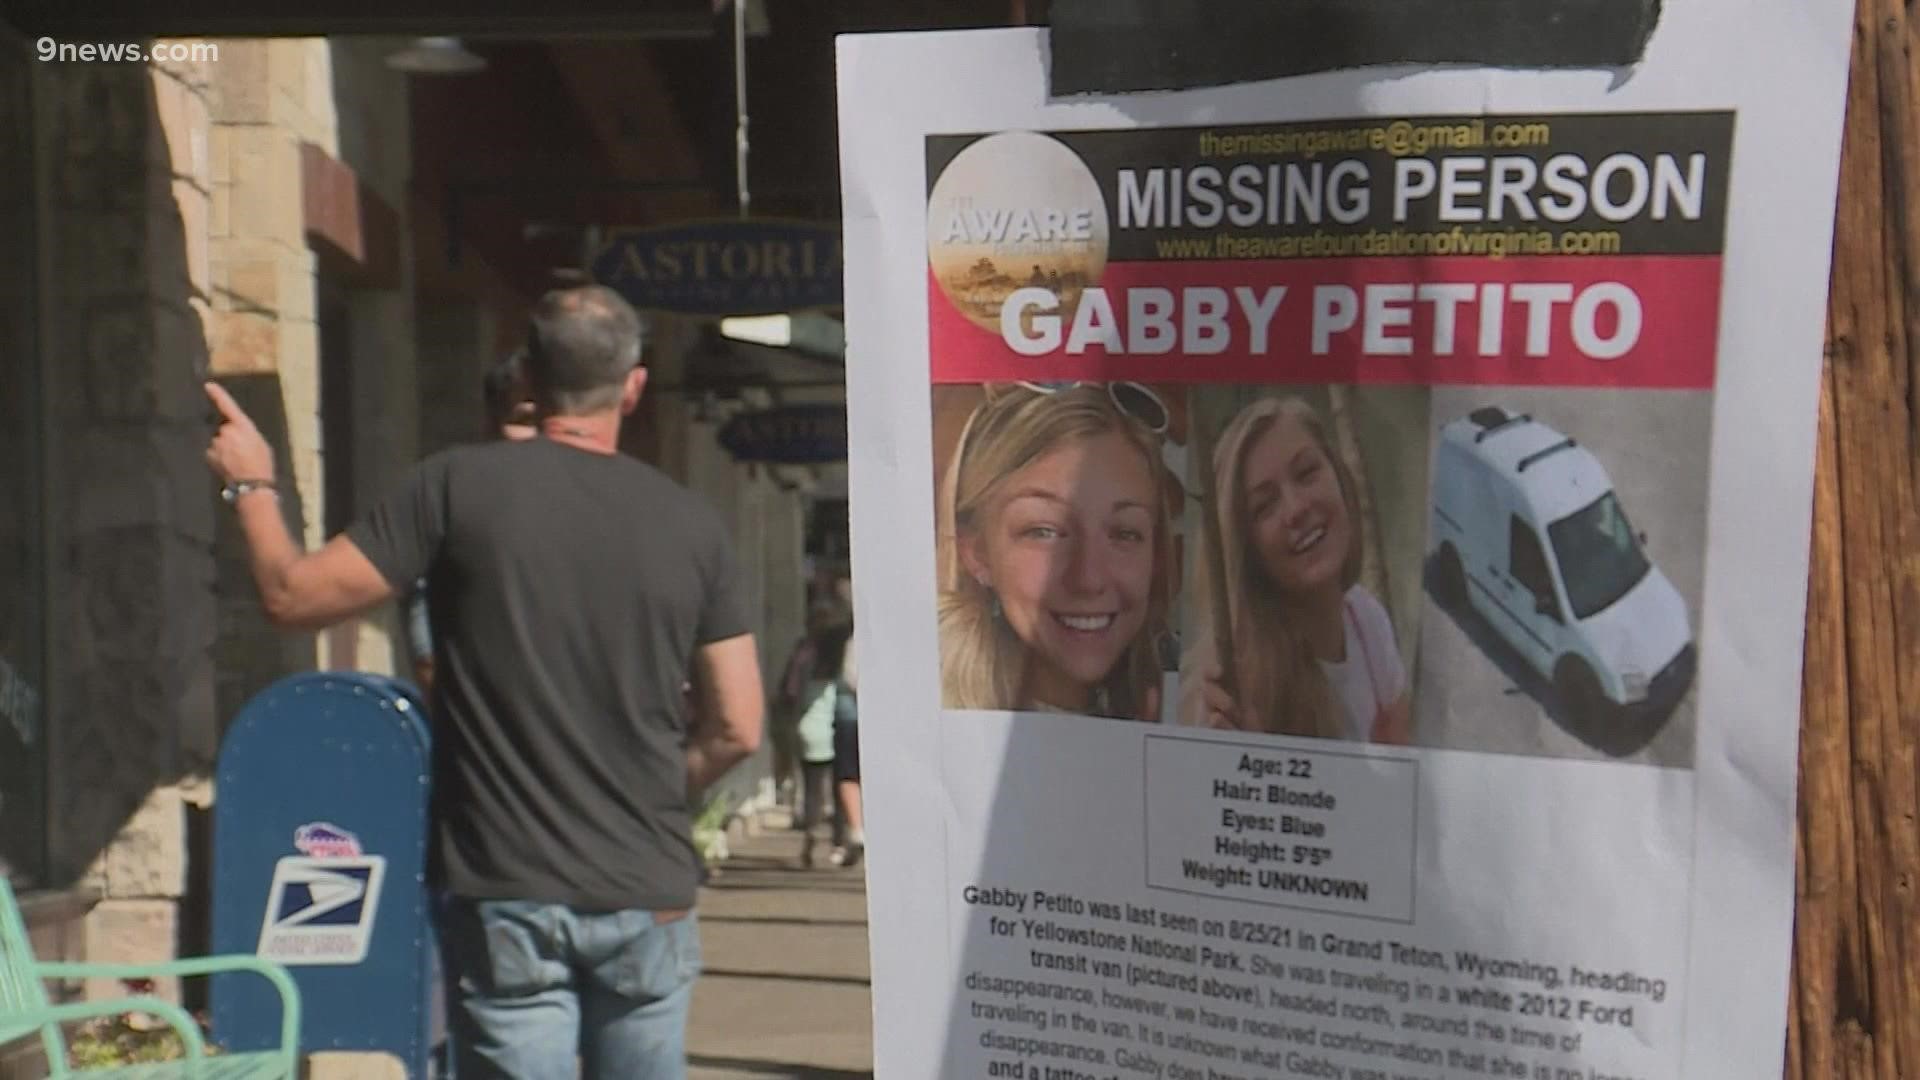 Gabby Petito's family heard from her late August after while on a cross-country trip with fiancé Brian Laundrie – new police video shows their van was stopped.